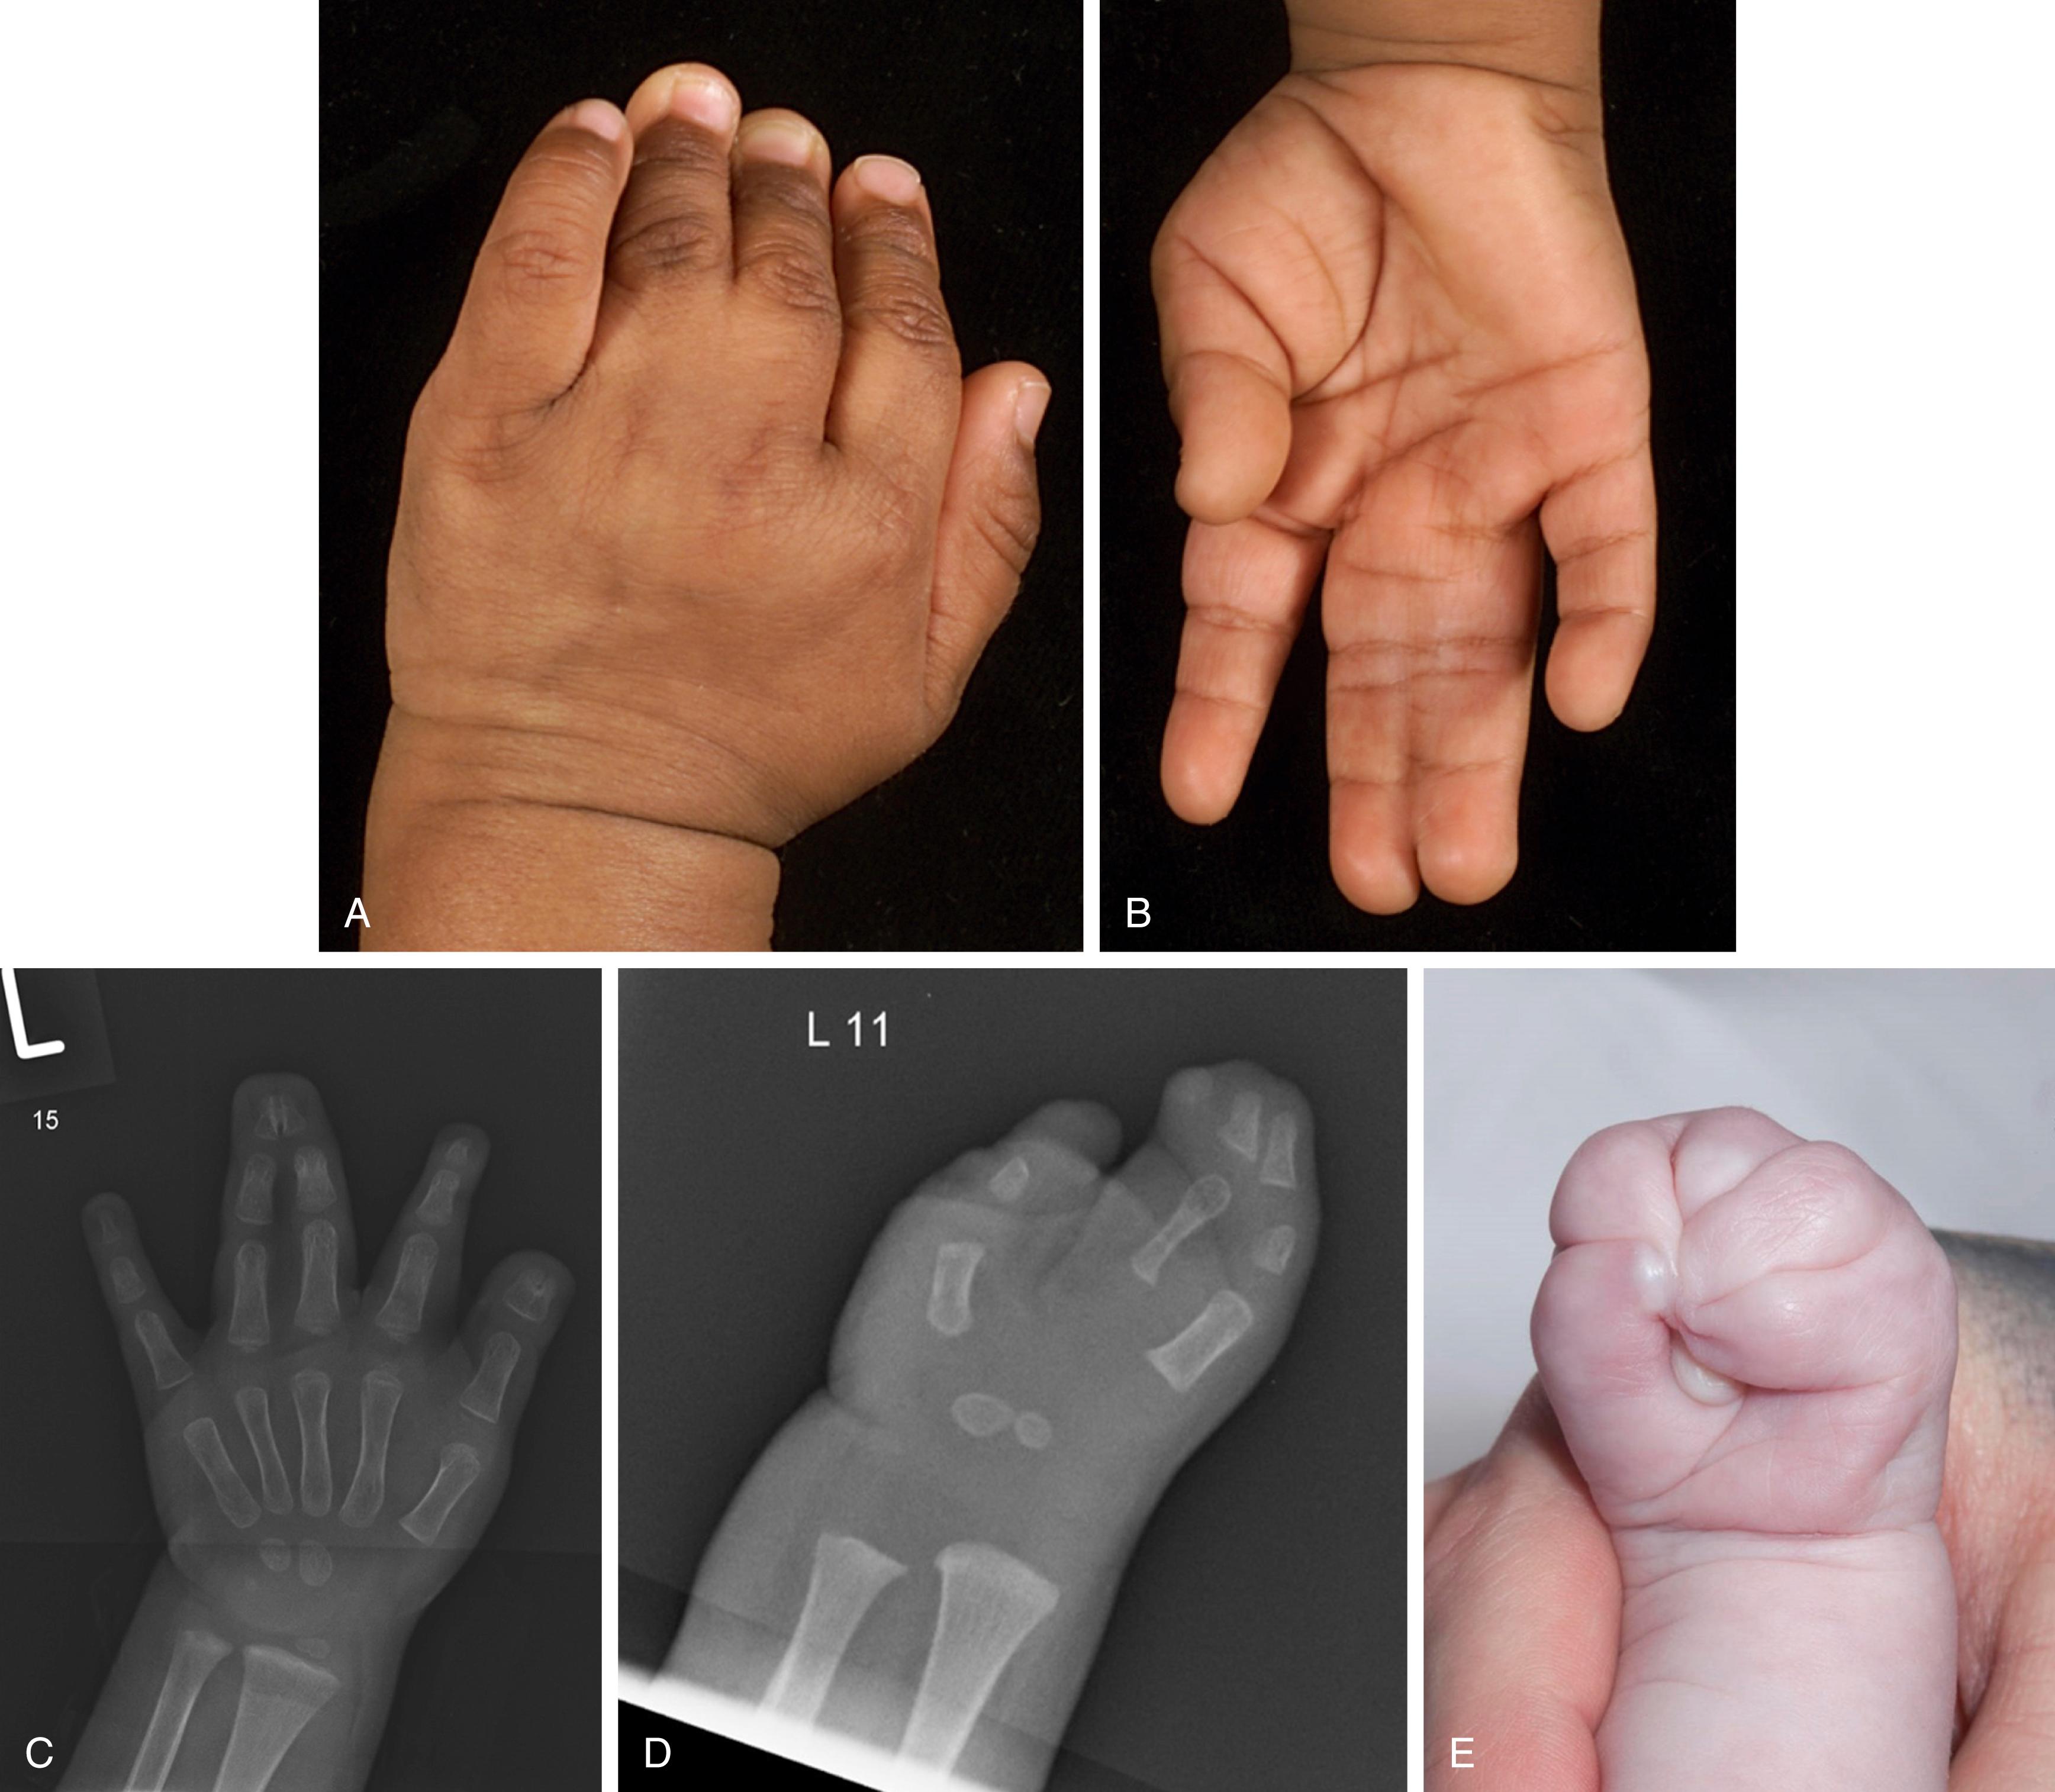 Fig. 45.2, Images of different types of syndactyly. (A) Complete syndactyly. (B) Incomplete syndactyly. (C) Complex syndactyly. (D) Complicated syndactyly. (E) Acrosyndactyly.